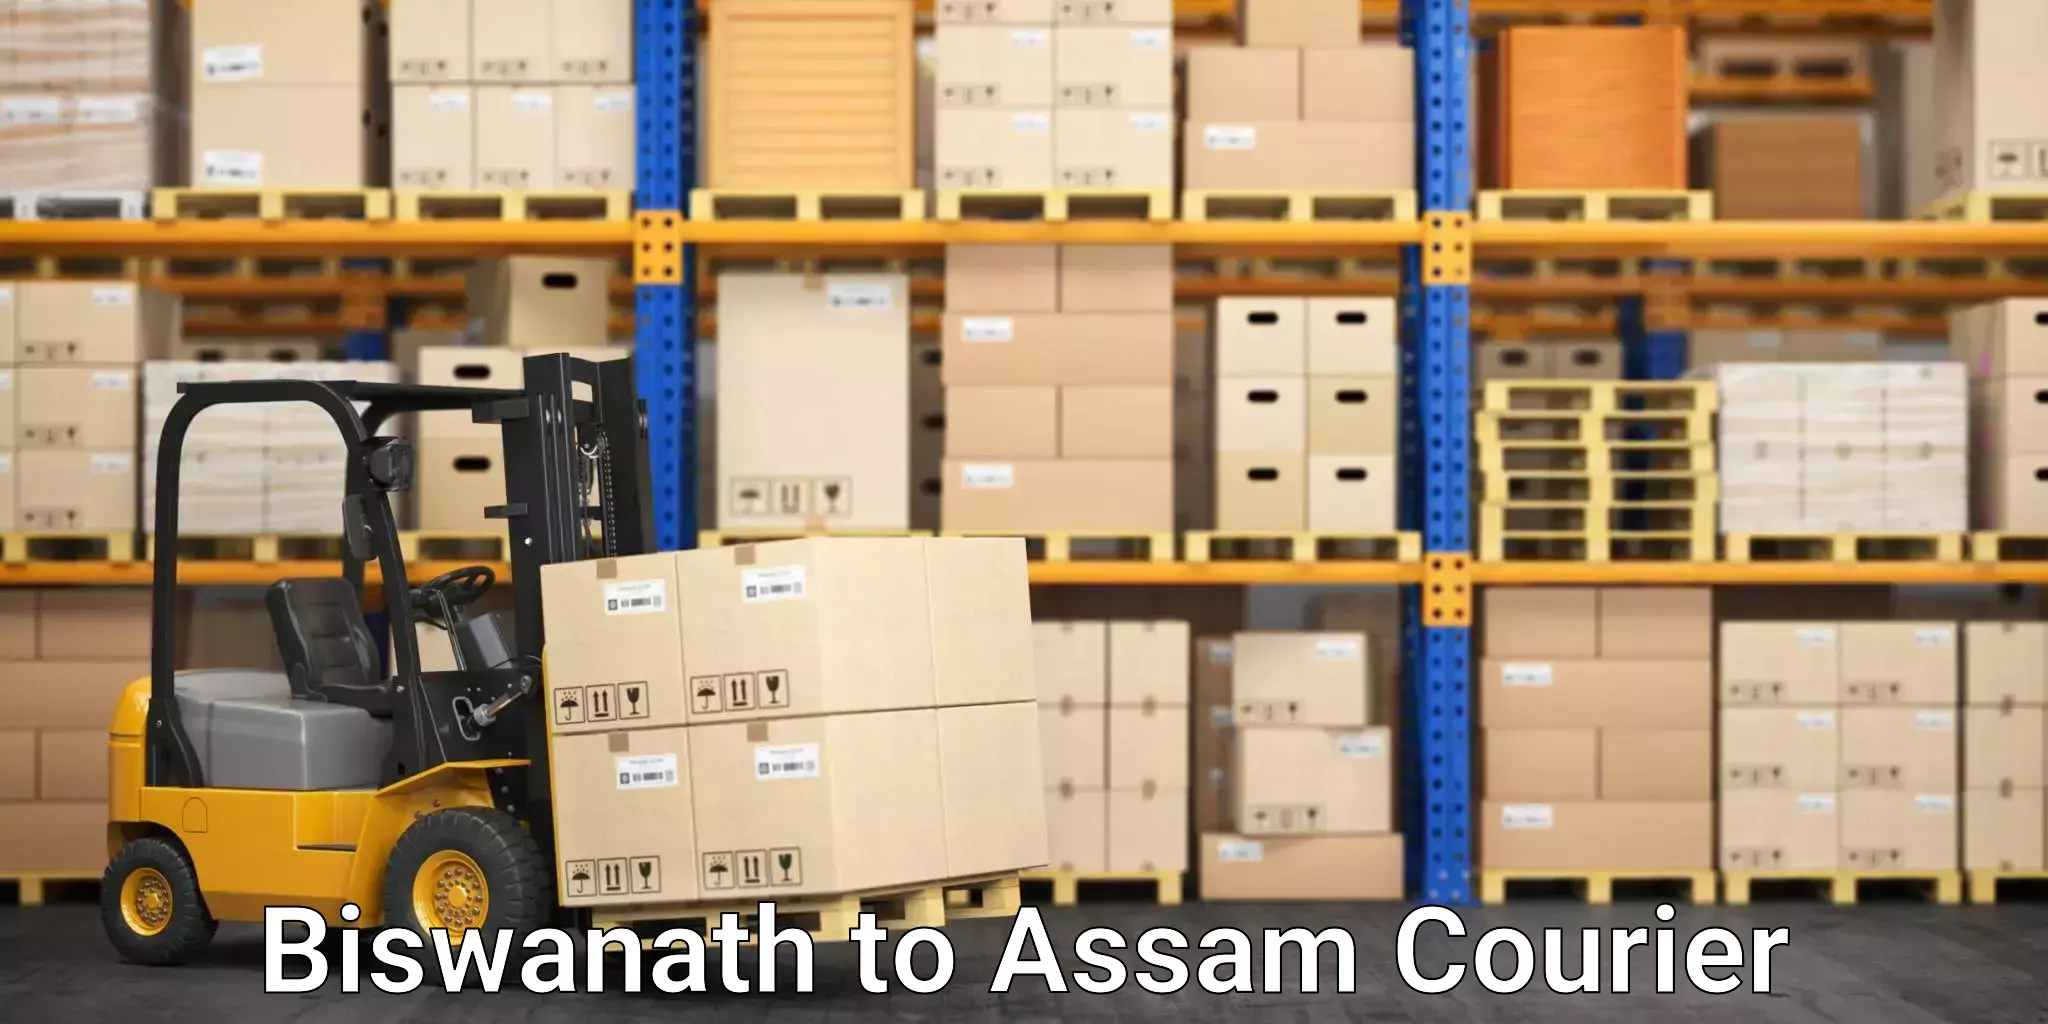 On-call courier service in Biswanath to Sonitpur